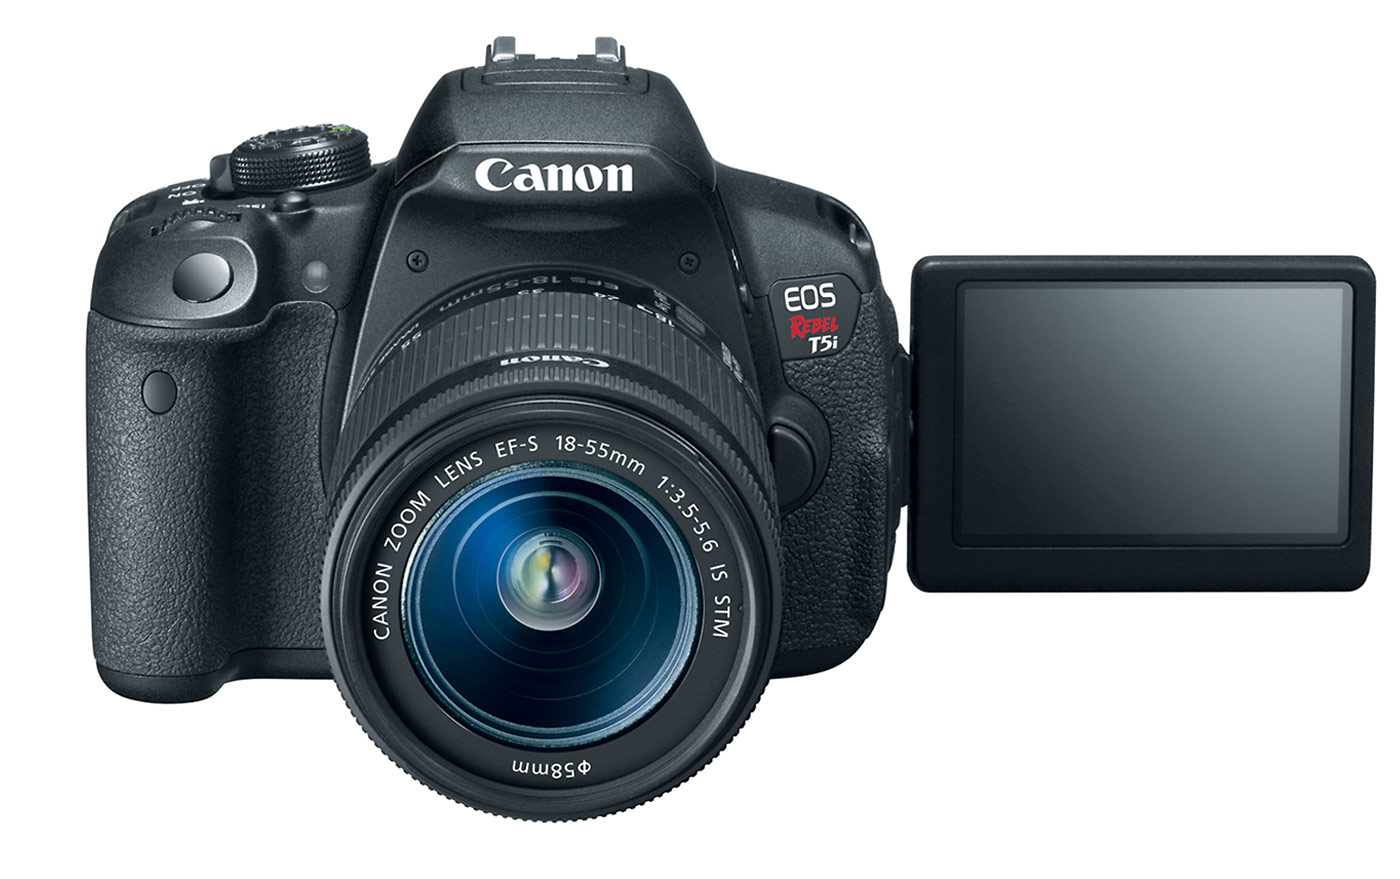 Canon EOS Rebel T5i / EOS 700D - 3-inch Vari-Angle Touchscreen LCD Display